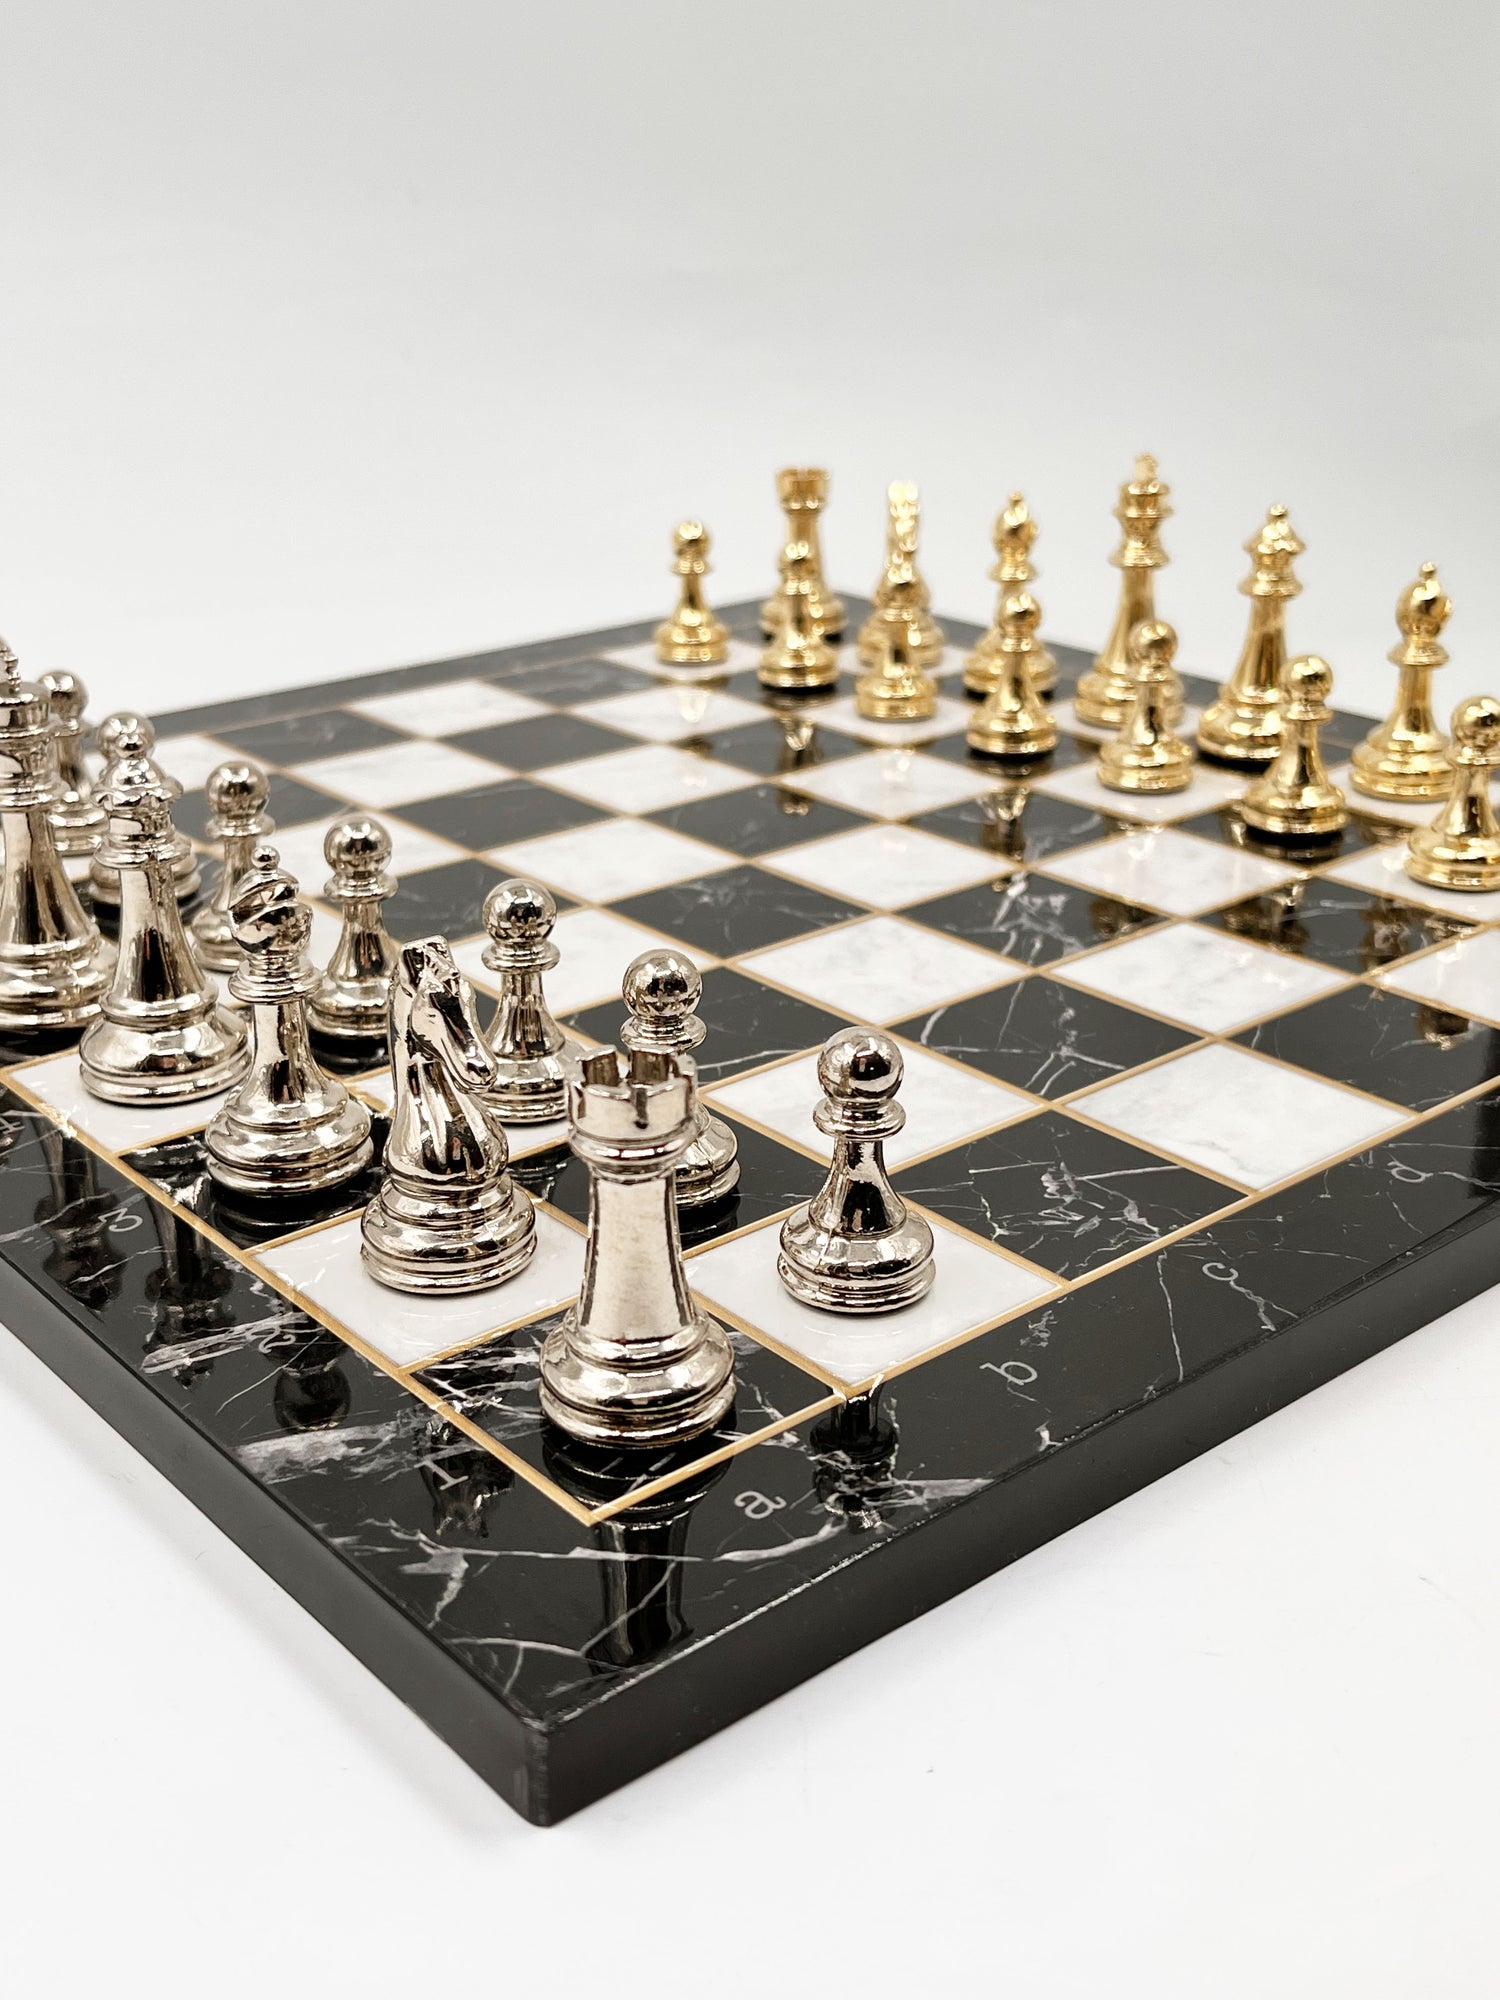 Marble-Patterned Wooden Chess Set: Complete with Pieces - Ketohandcraft